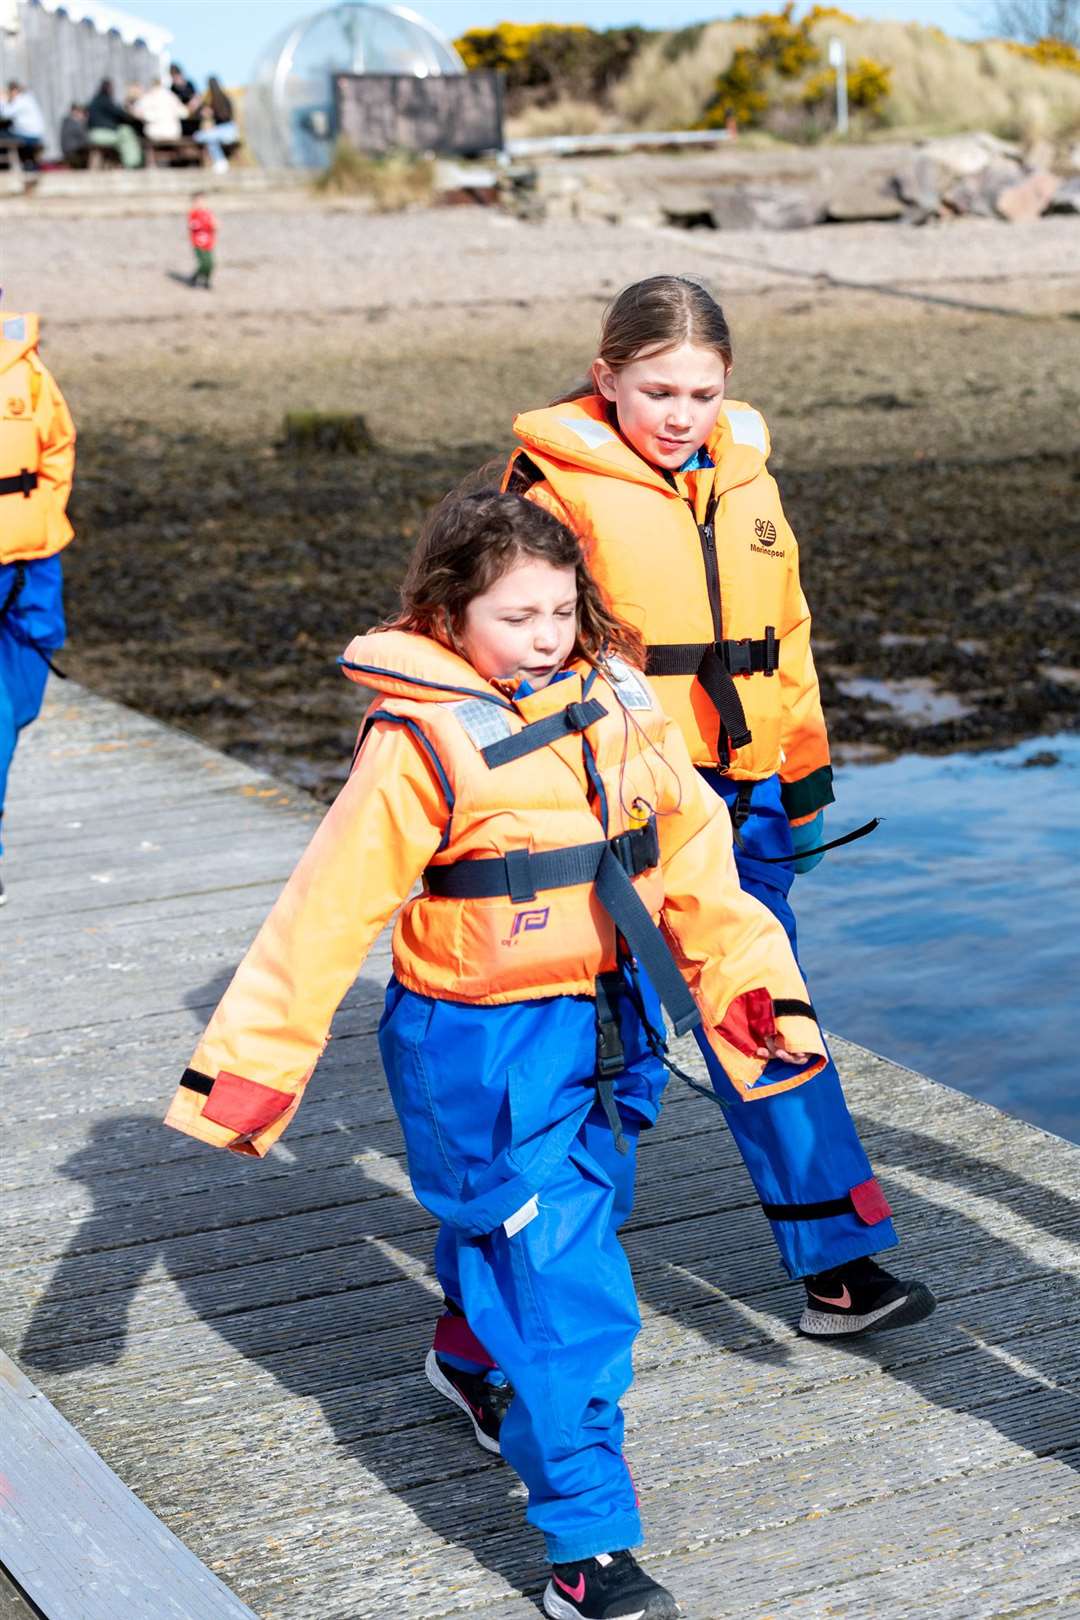 Mali Parker (8) and Scout merry (9) heading down the pontoon at Findhorn Marina to board the North 58 Sea Adventures boat for water based activities.